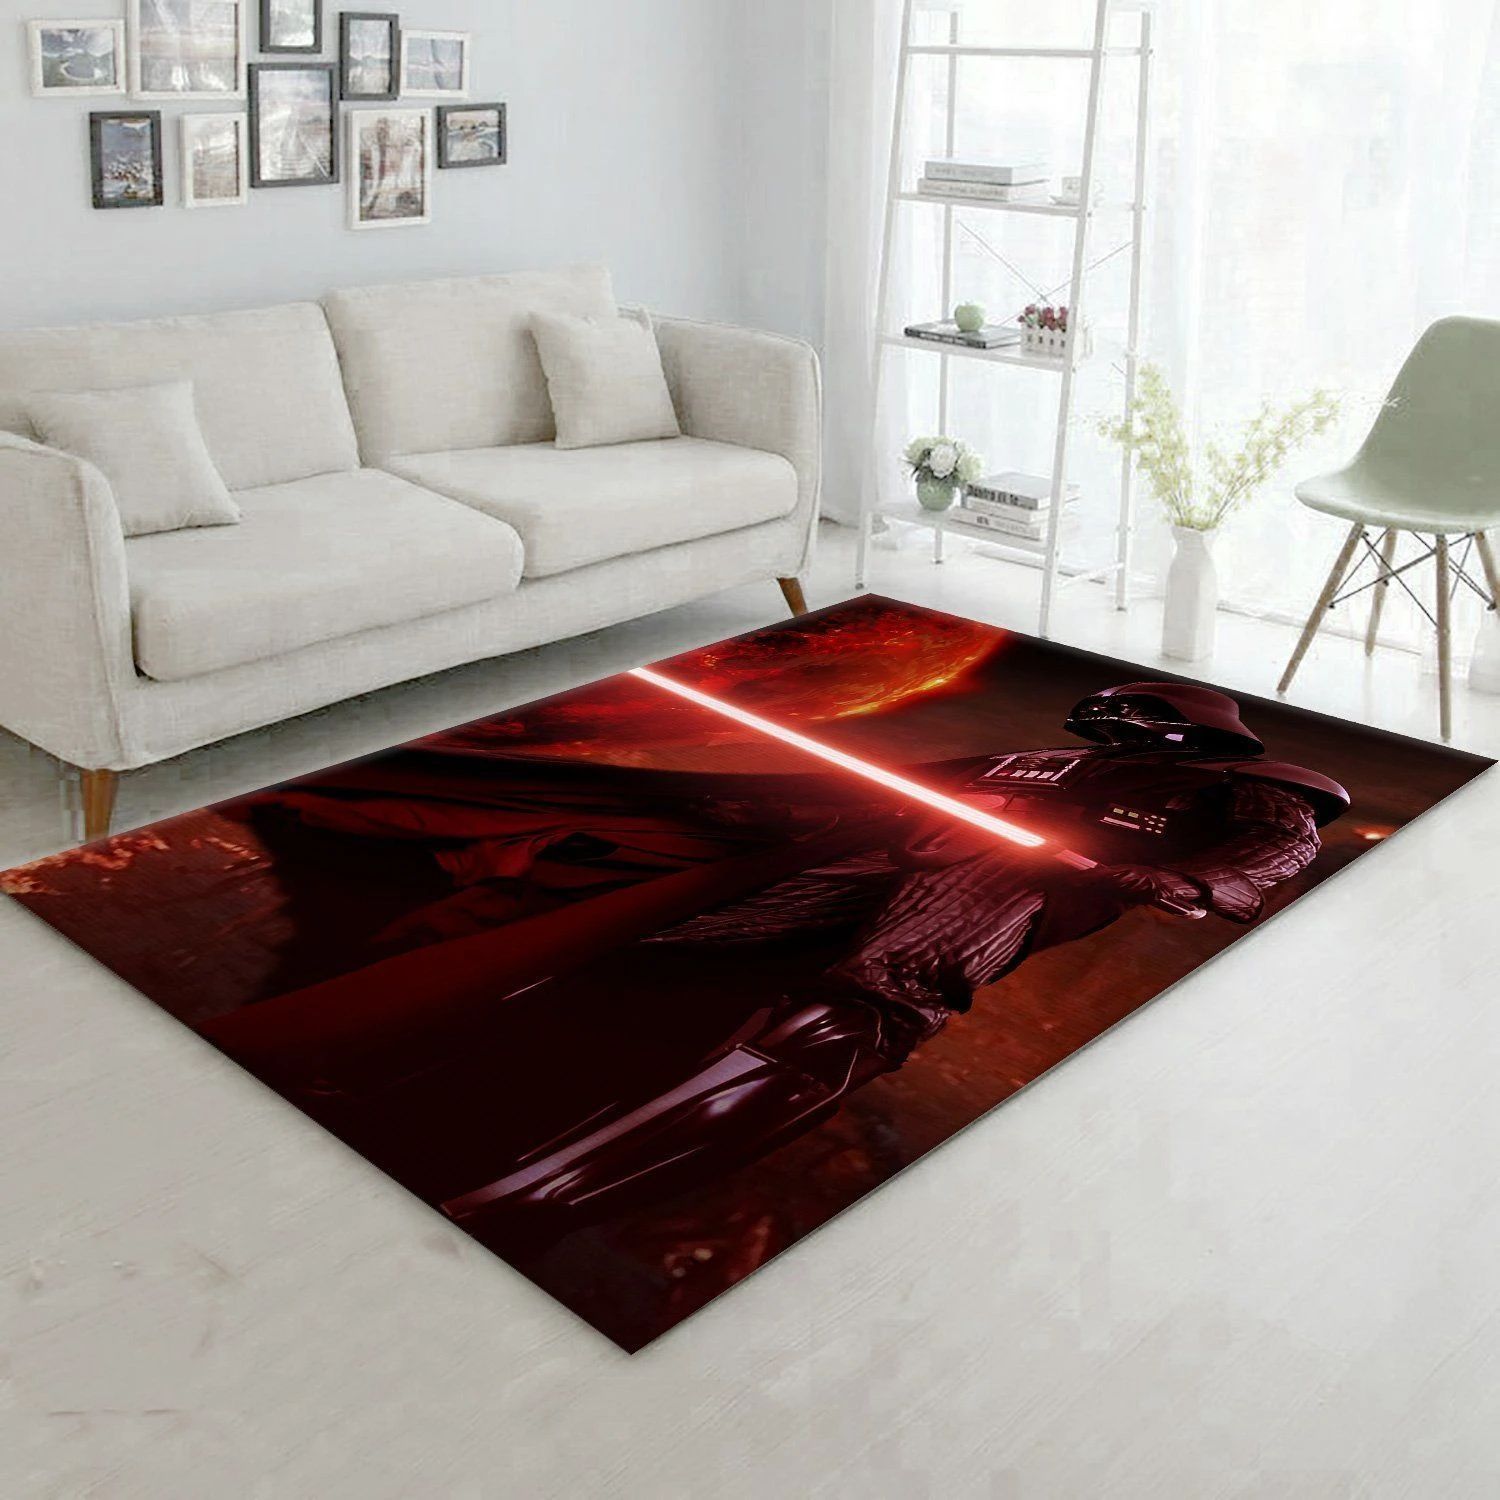 Darth Vader With Light Saber Star Wars Area Rugs Living Room Carpet Christmas Gift Floor Decor The US Decor - Indoor Outdoor Rugs 3